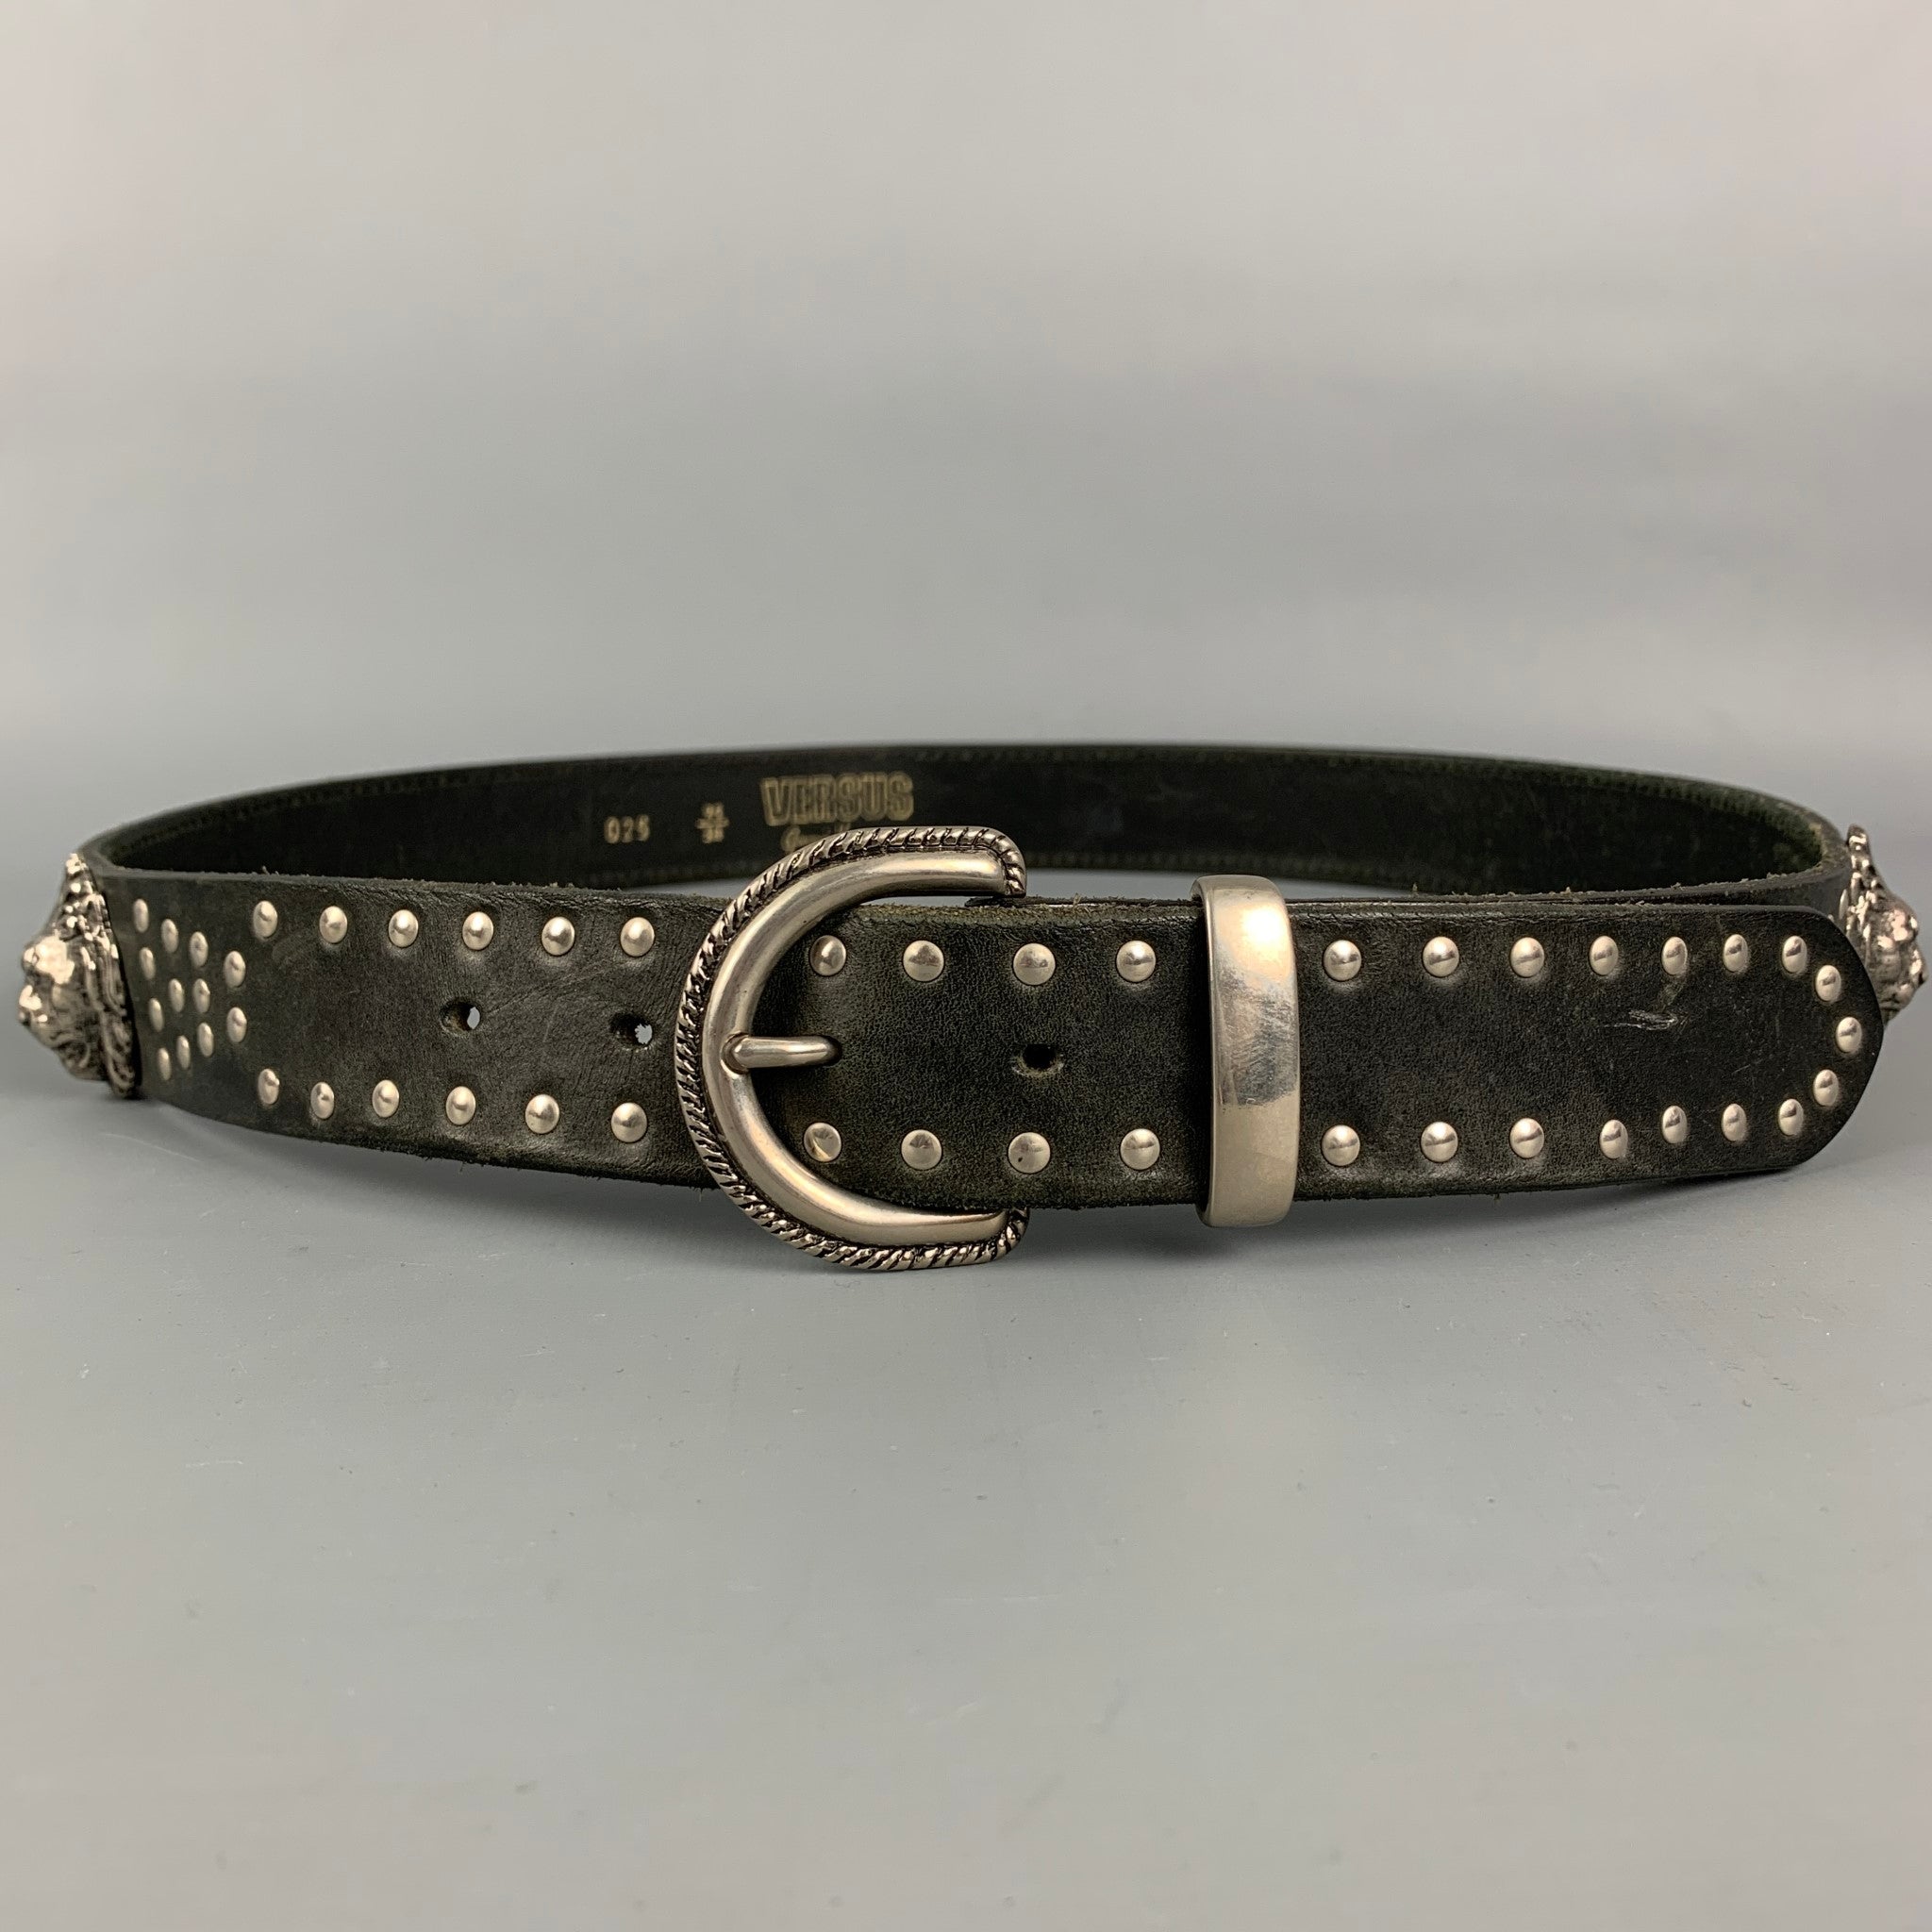 Gianni Versace - Authenticated Belt - Leather Black for Women, Very Good Condition